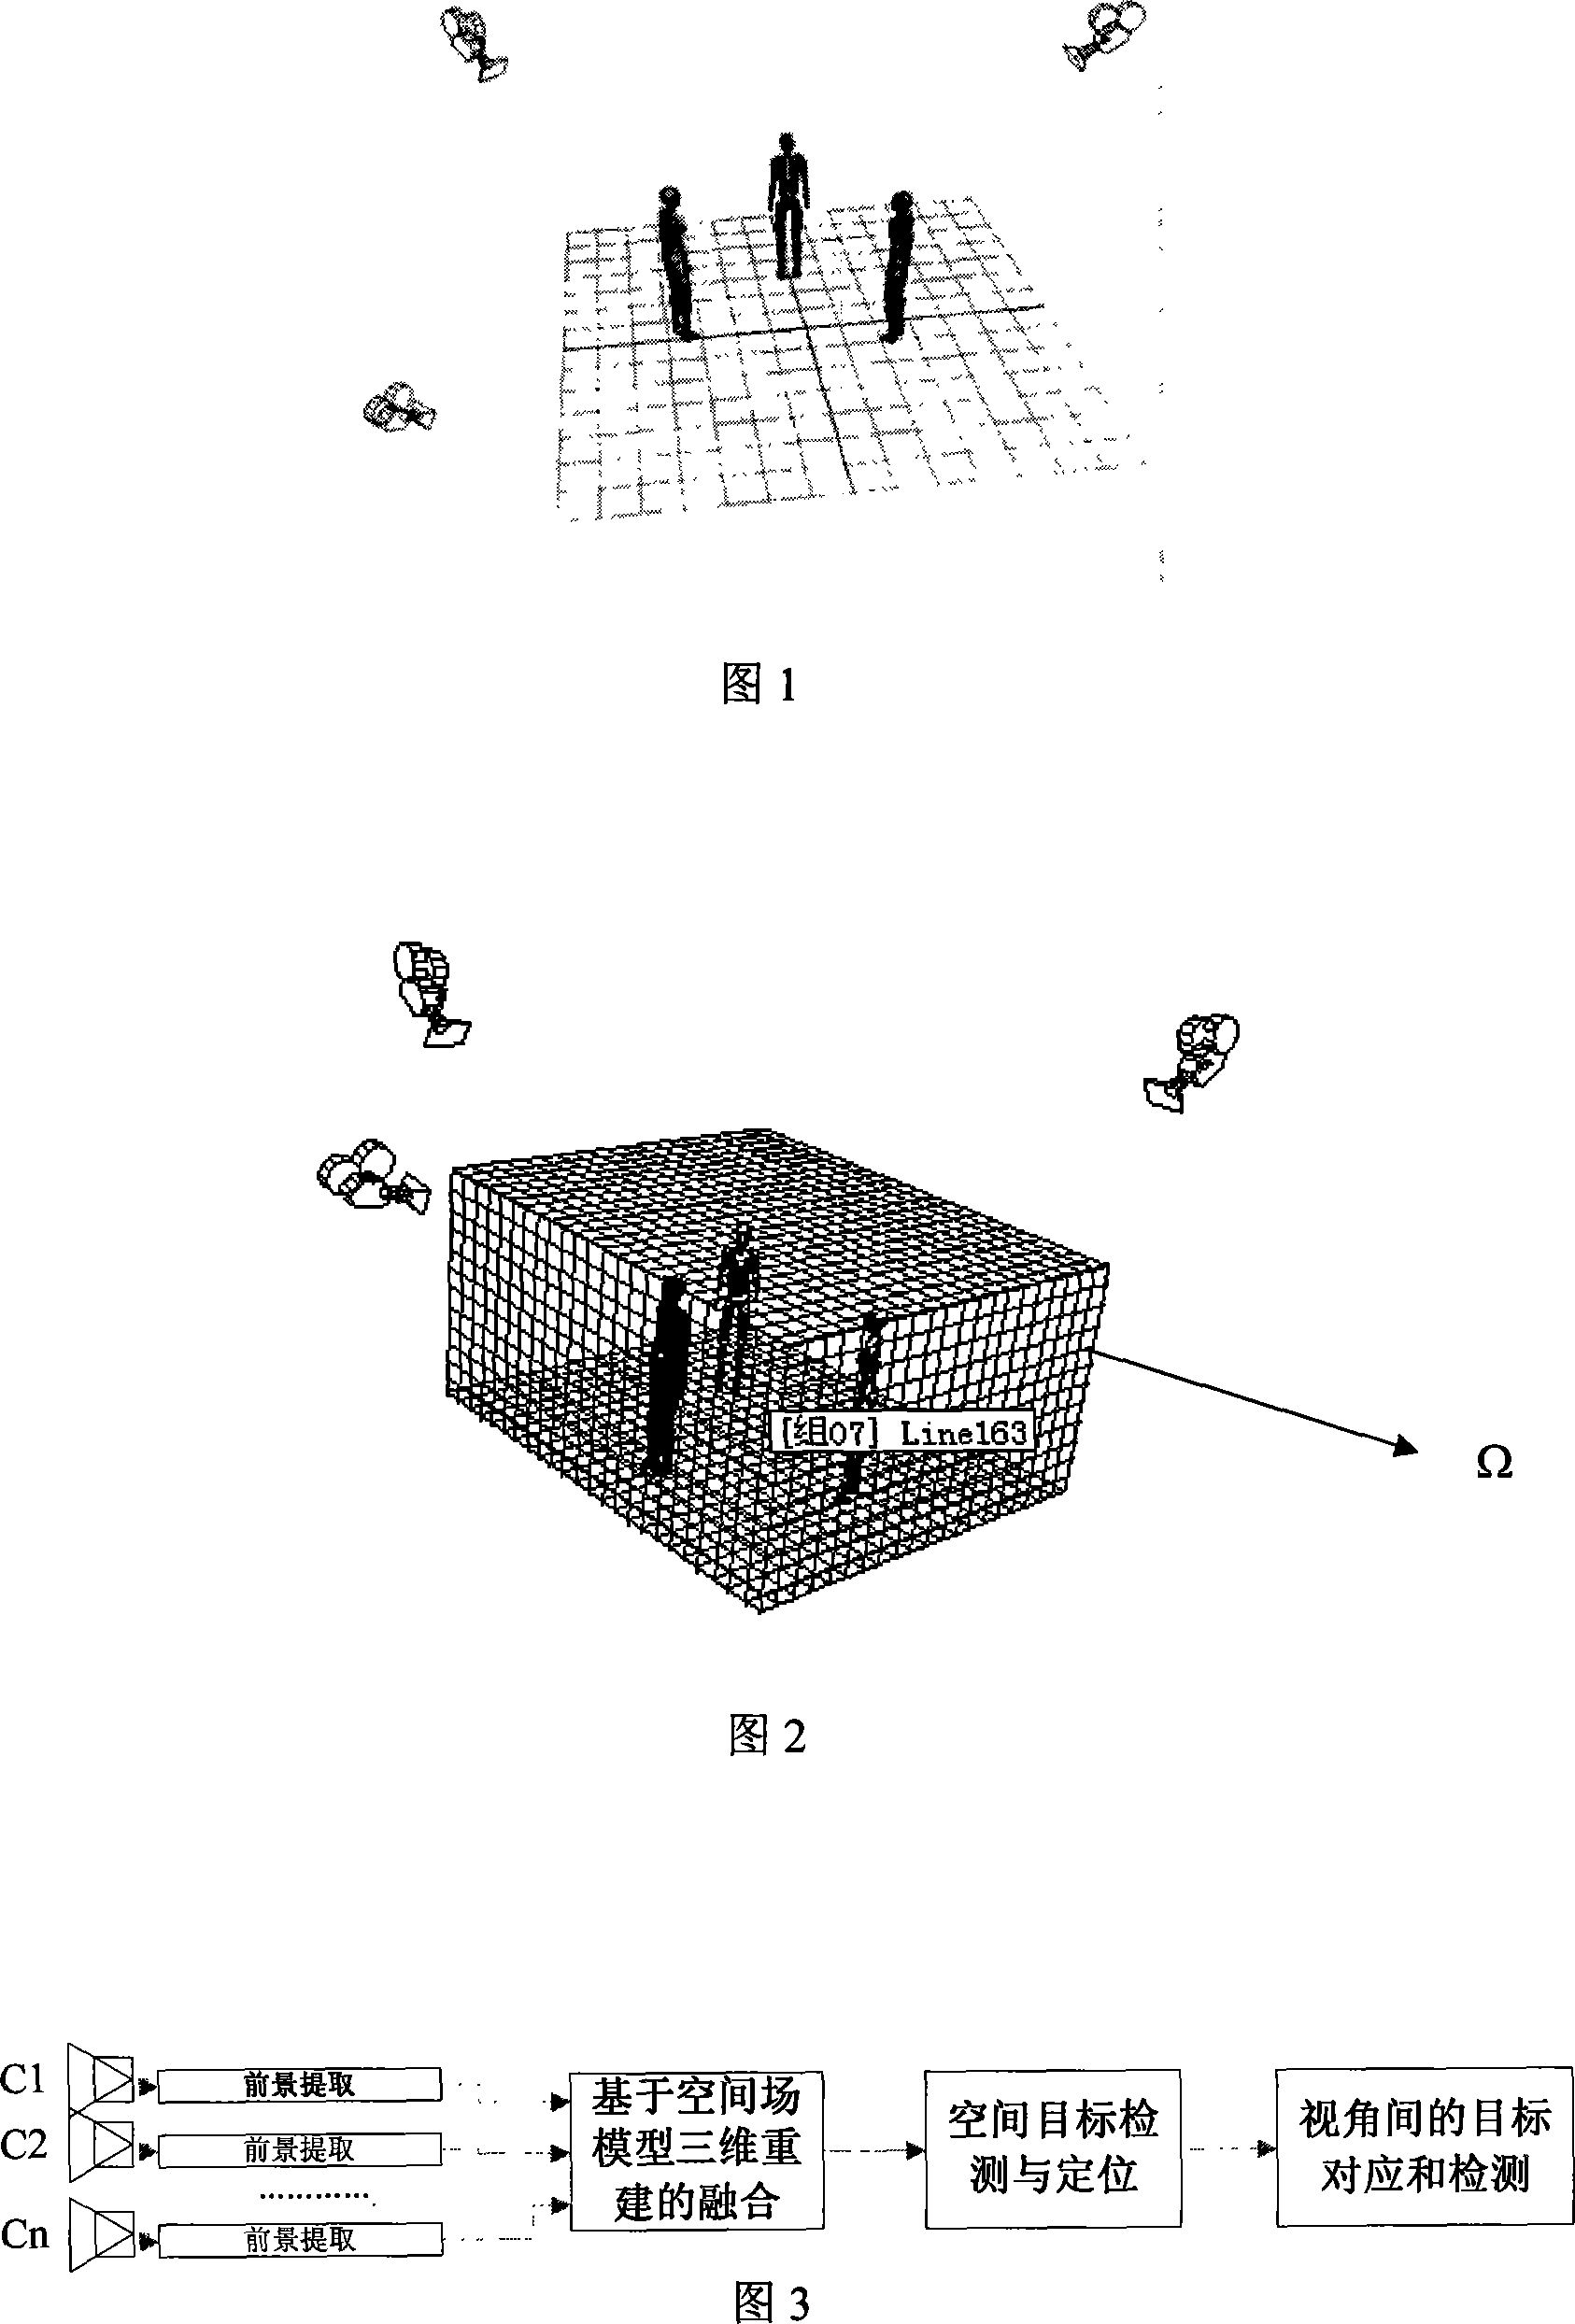 Multiple angle movement target detection, positioning and aligning method